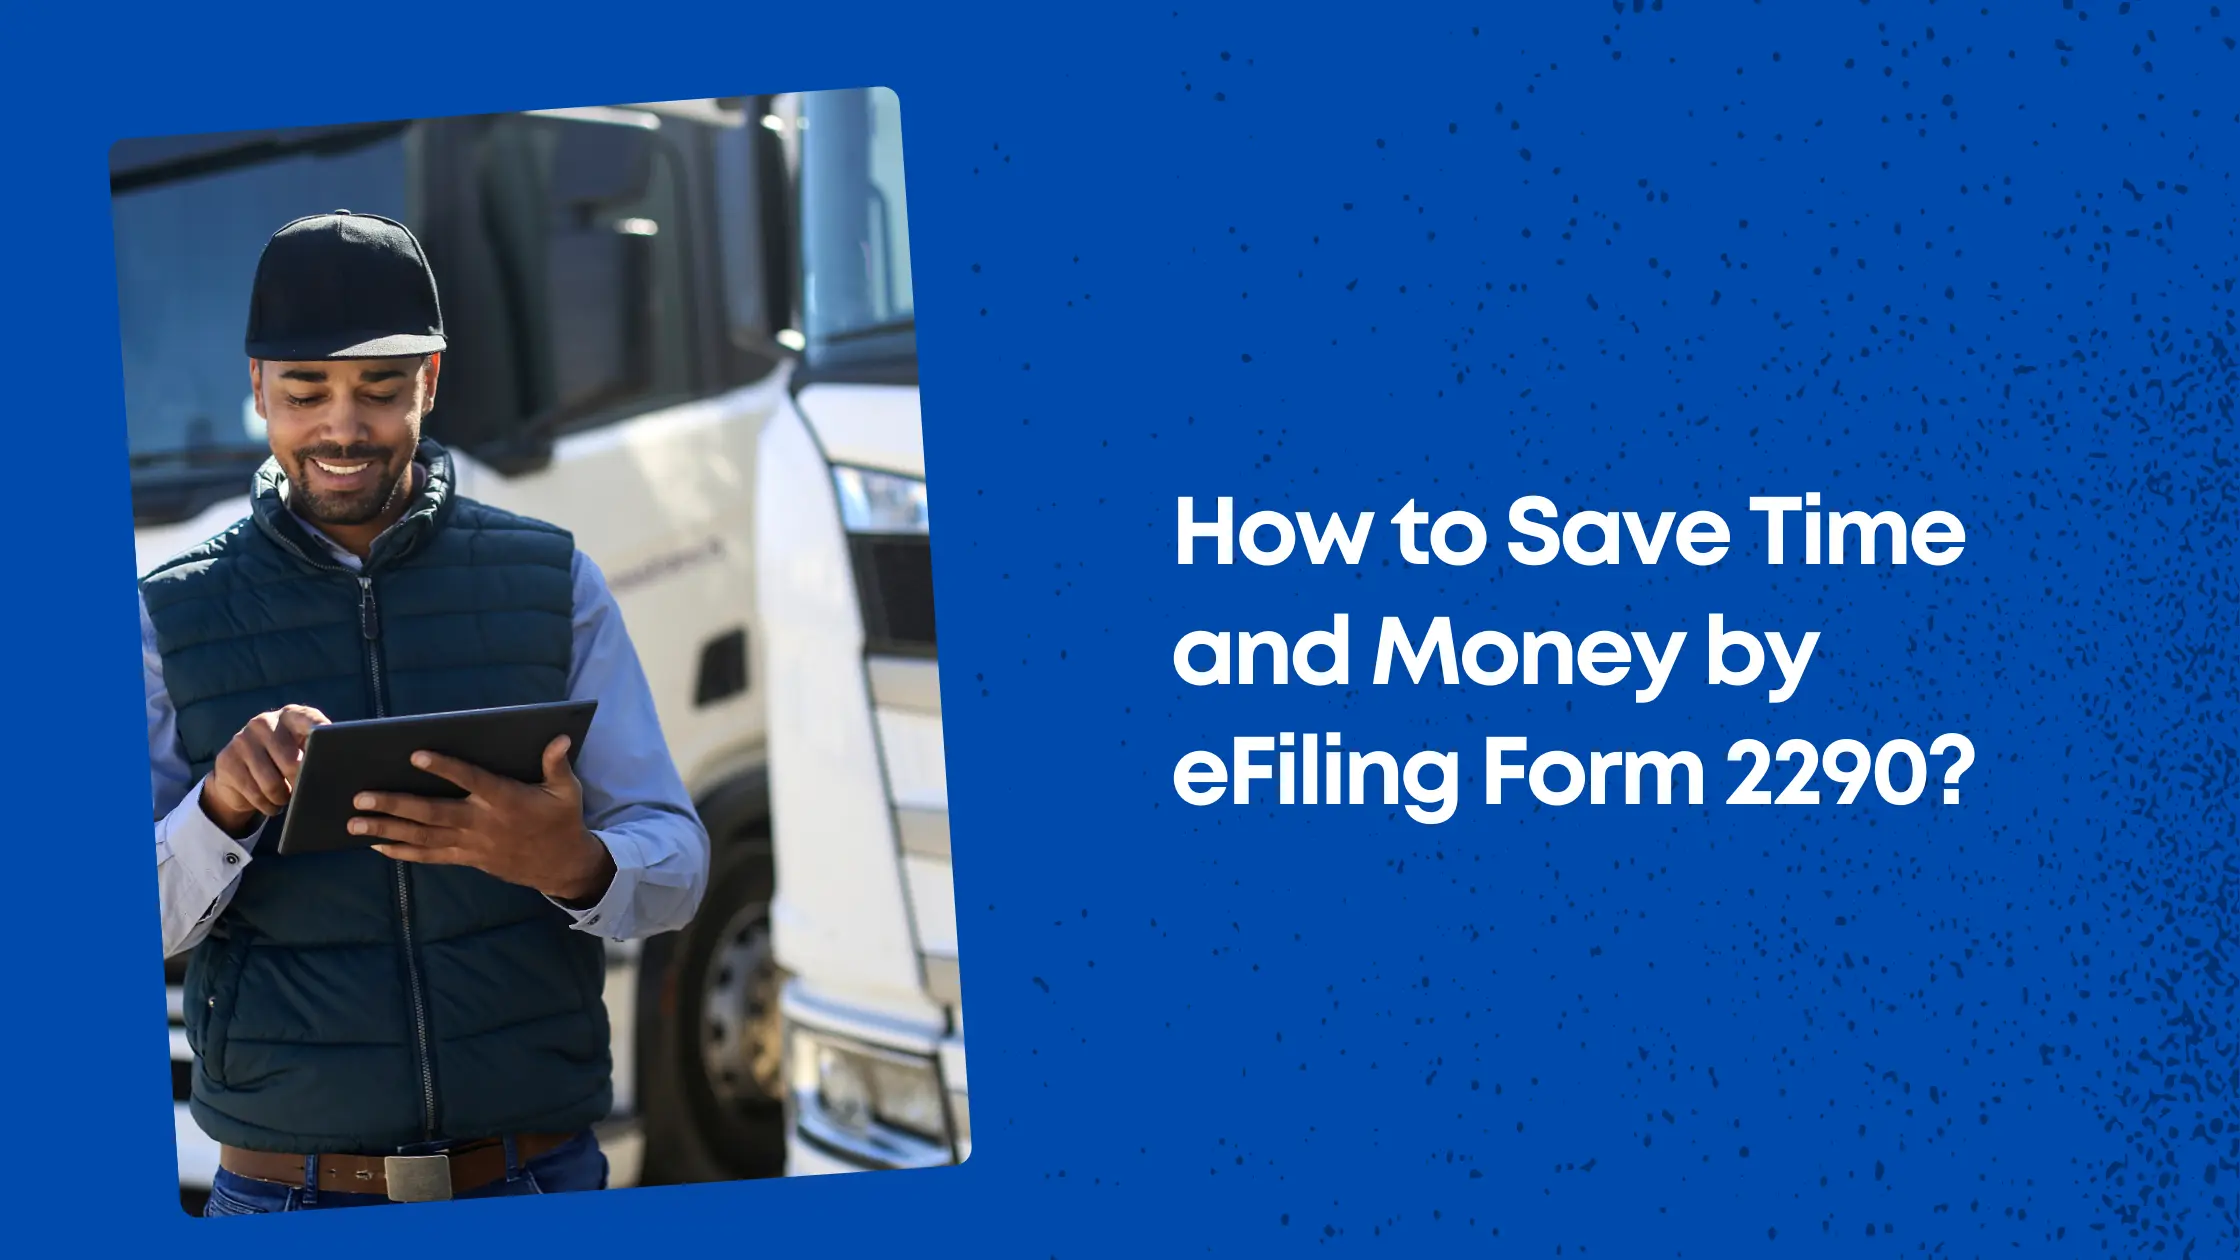 How to Save Time and Money by eFiling Form 2290